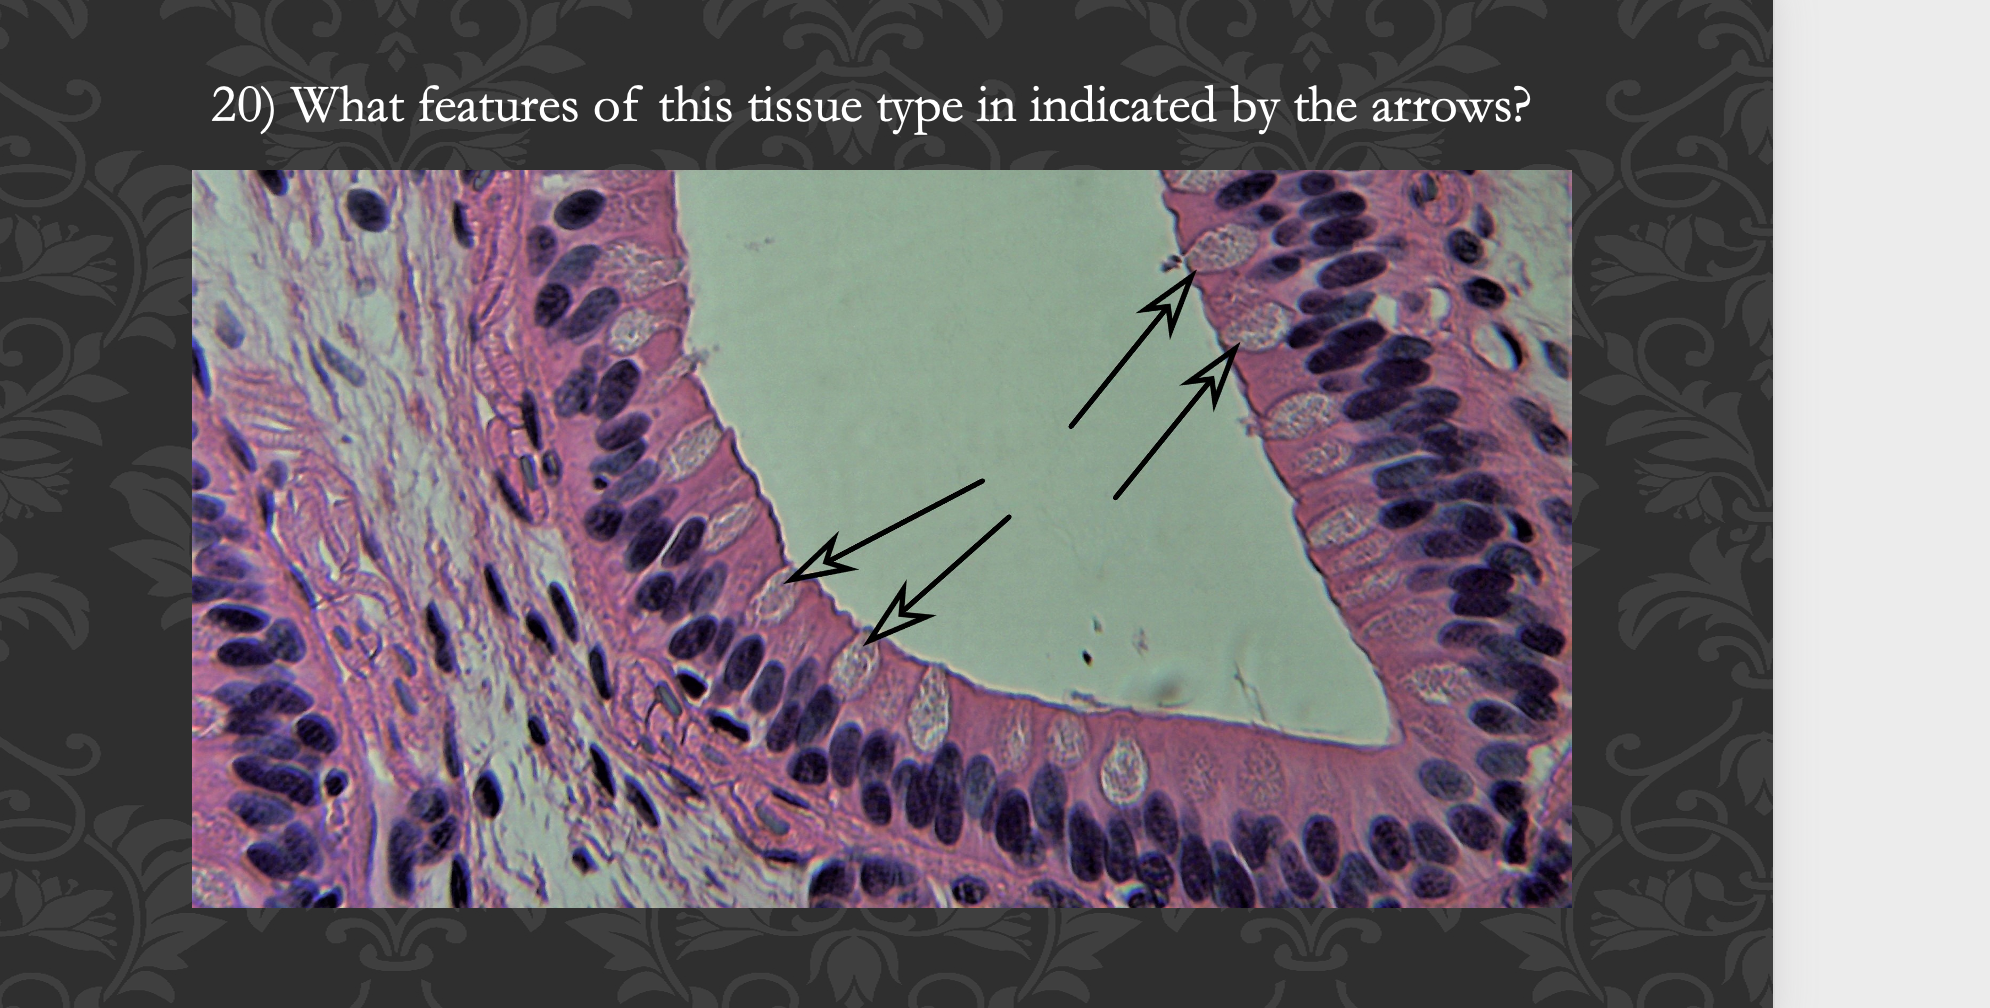 20) What features of this tissue type in indicated by the arrows?